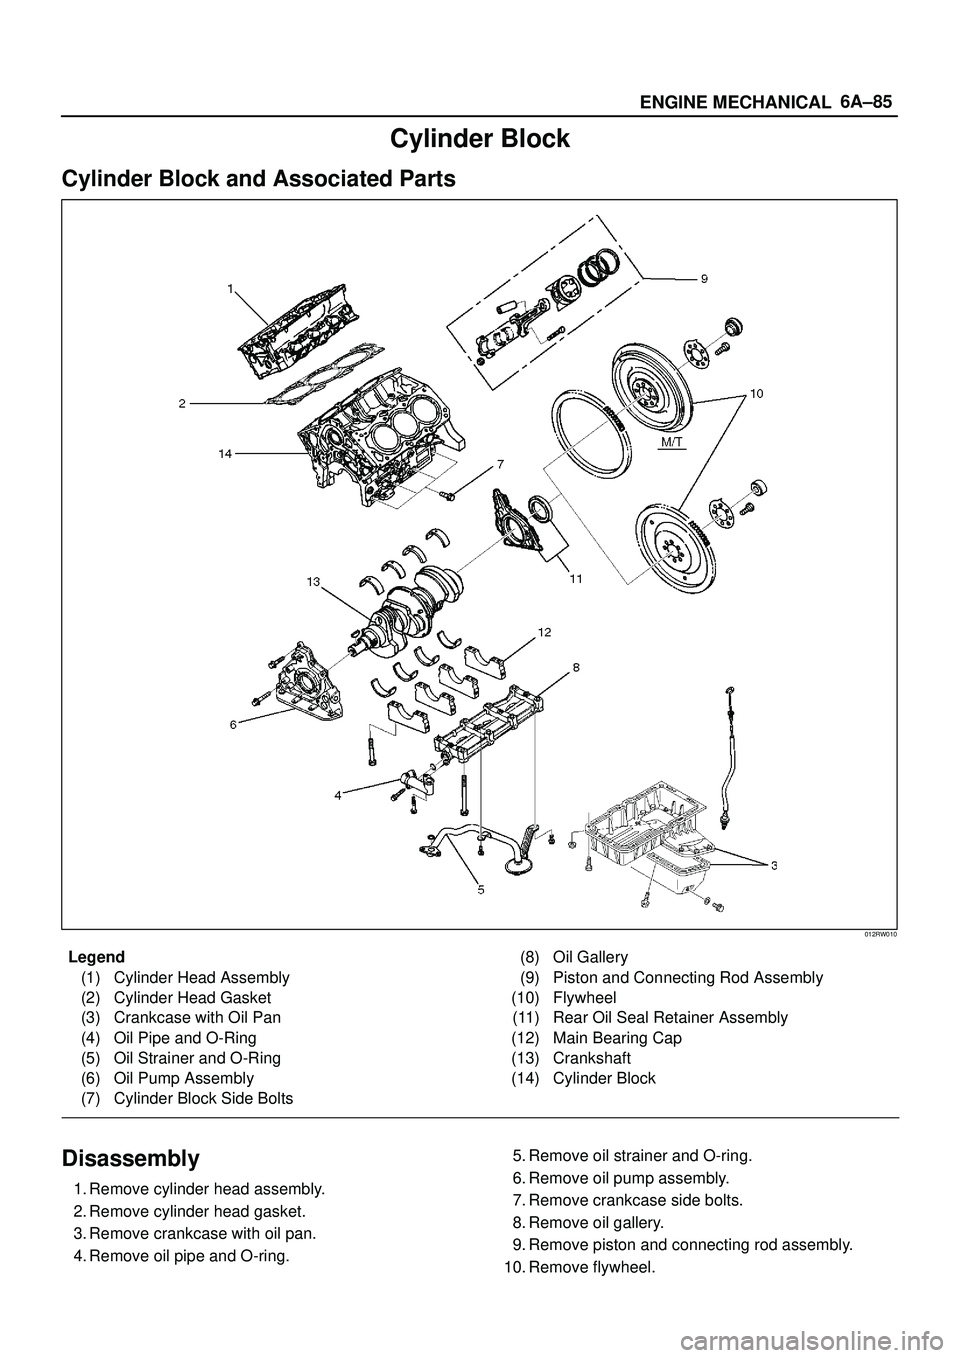 ISUZU TROOPER 1998  Service Service Manual 6A±85
ENGINE MECHANICAL
Cylinder Block
Cylinder Block and Associated Parts
012RW010
Legend
(1) Cylinder Head Assembly
(2) Cylinder Head Gasket
(3) Crankcase with Oil Pan
(4) Oil Pipe and O-Ring
(5) O